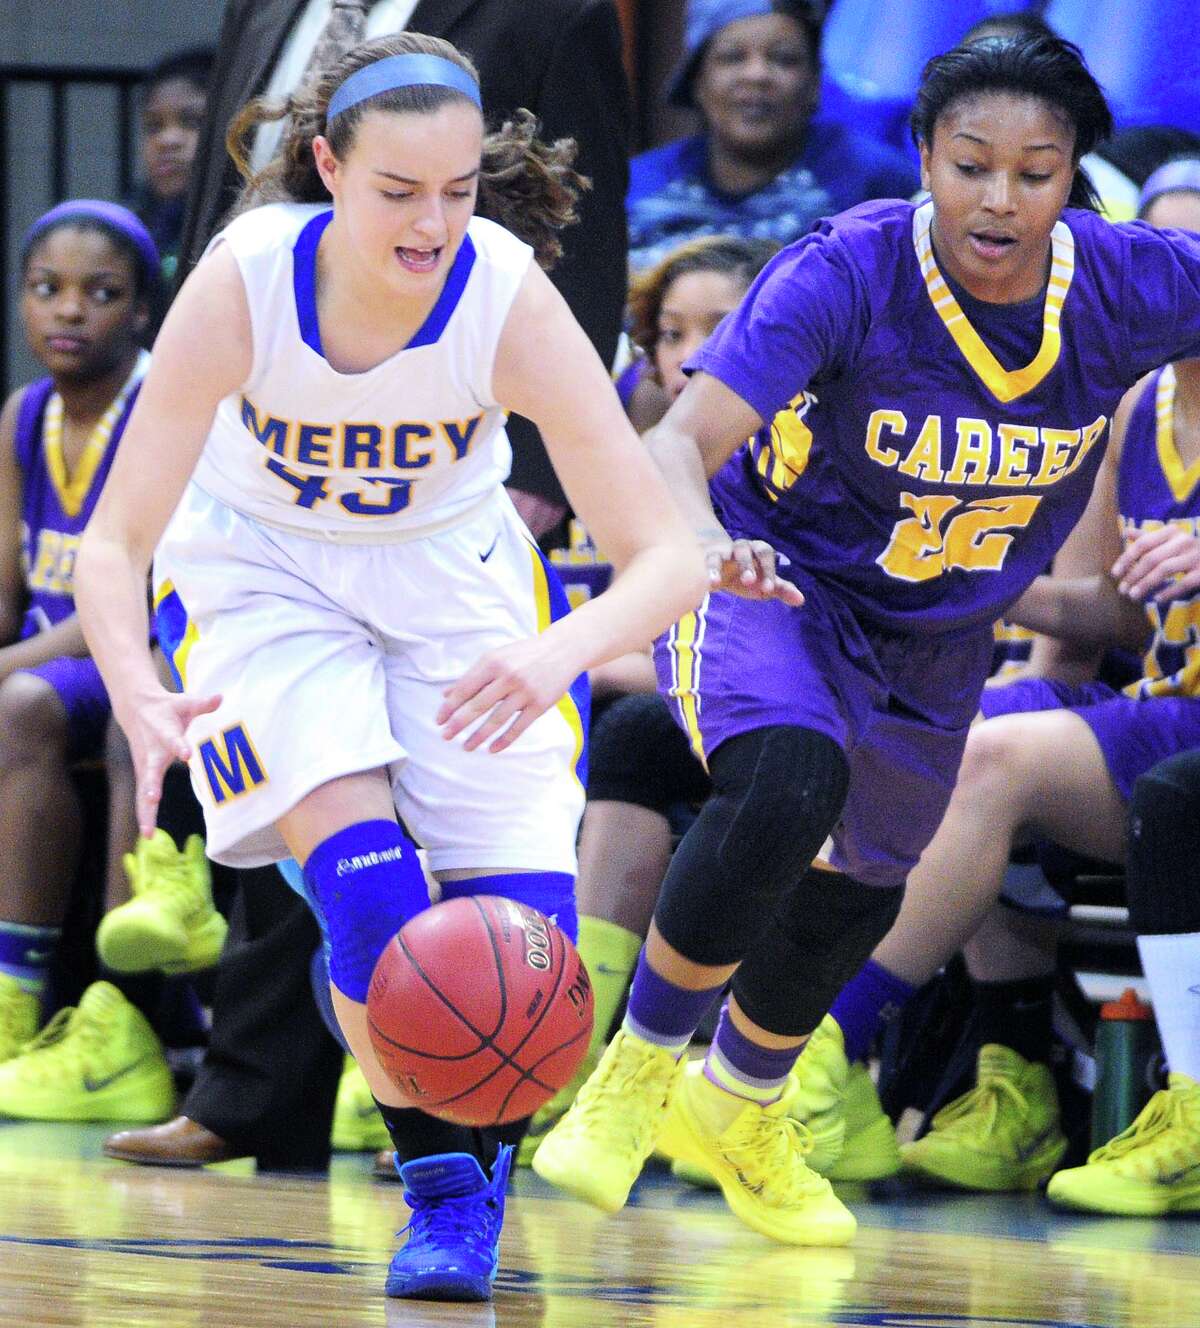 Haley Vanty (left) of Mercy moves the ball up the court after a Career turnover in the second half of the SCC Championship at the TD Bank Sports Center at Quinnipiac University in Hamden on 2/26/2014. (Arnold Gold-New Haven Register)